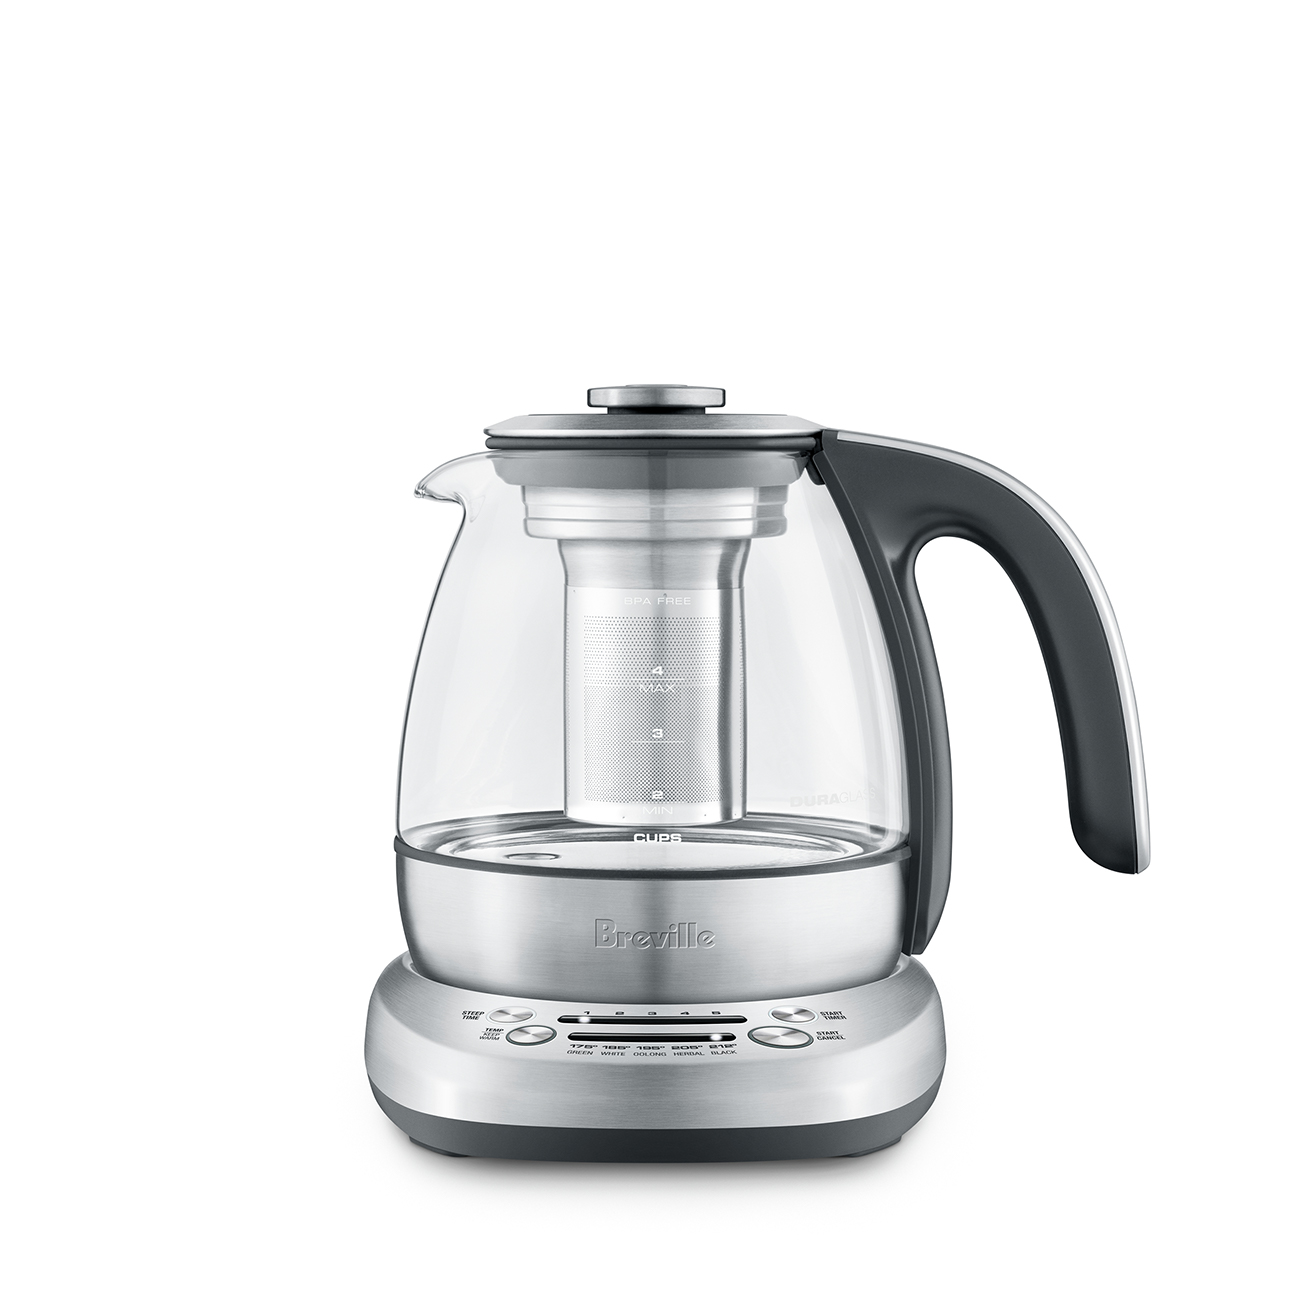 the Breville Smart Tea Infuser™ Compact Kettle